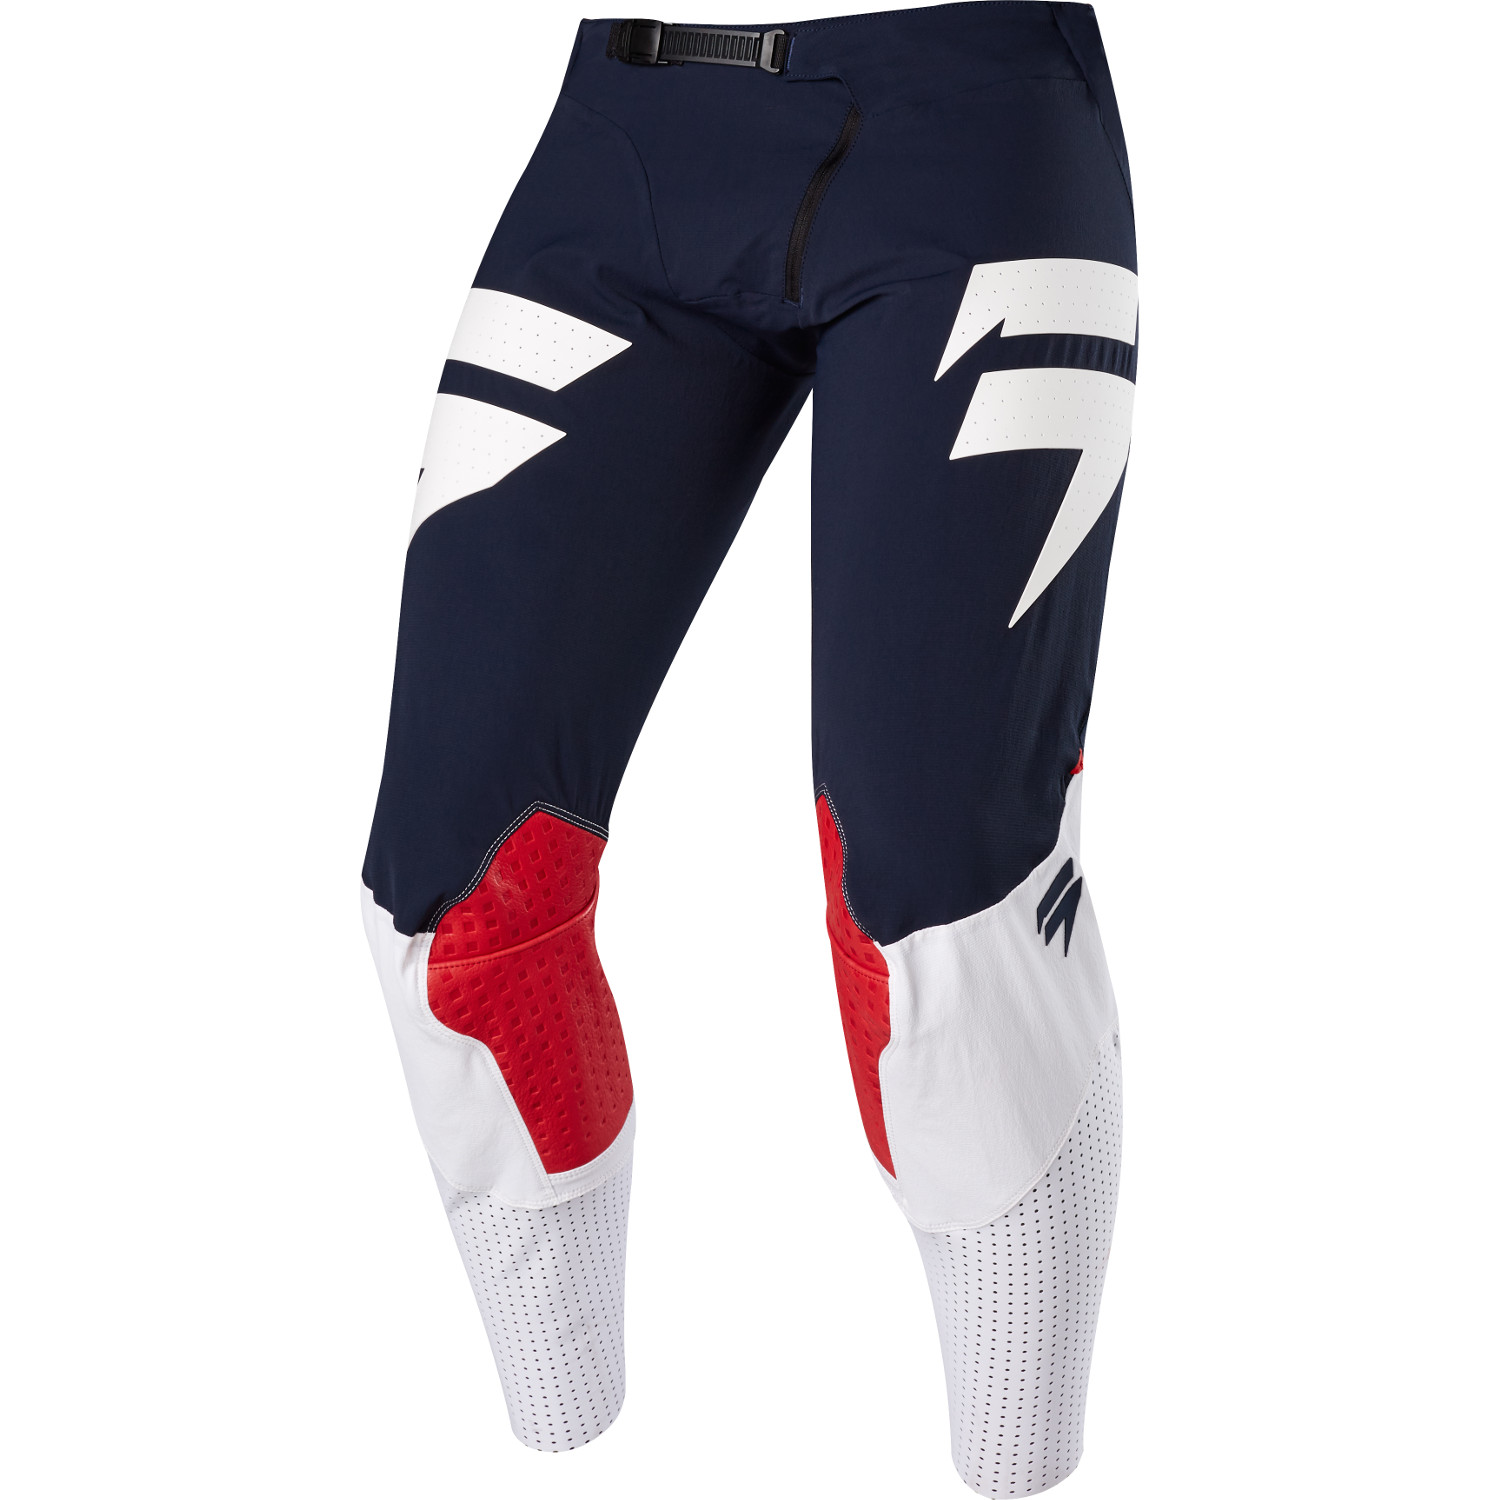 Shift MX Pants 3lue Label 4th Kind - Navy/Red